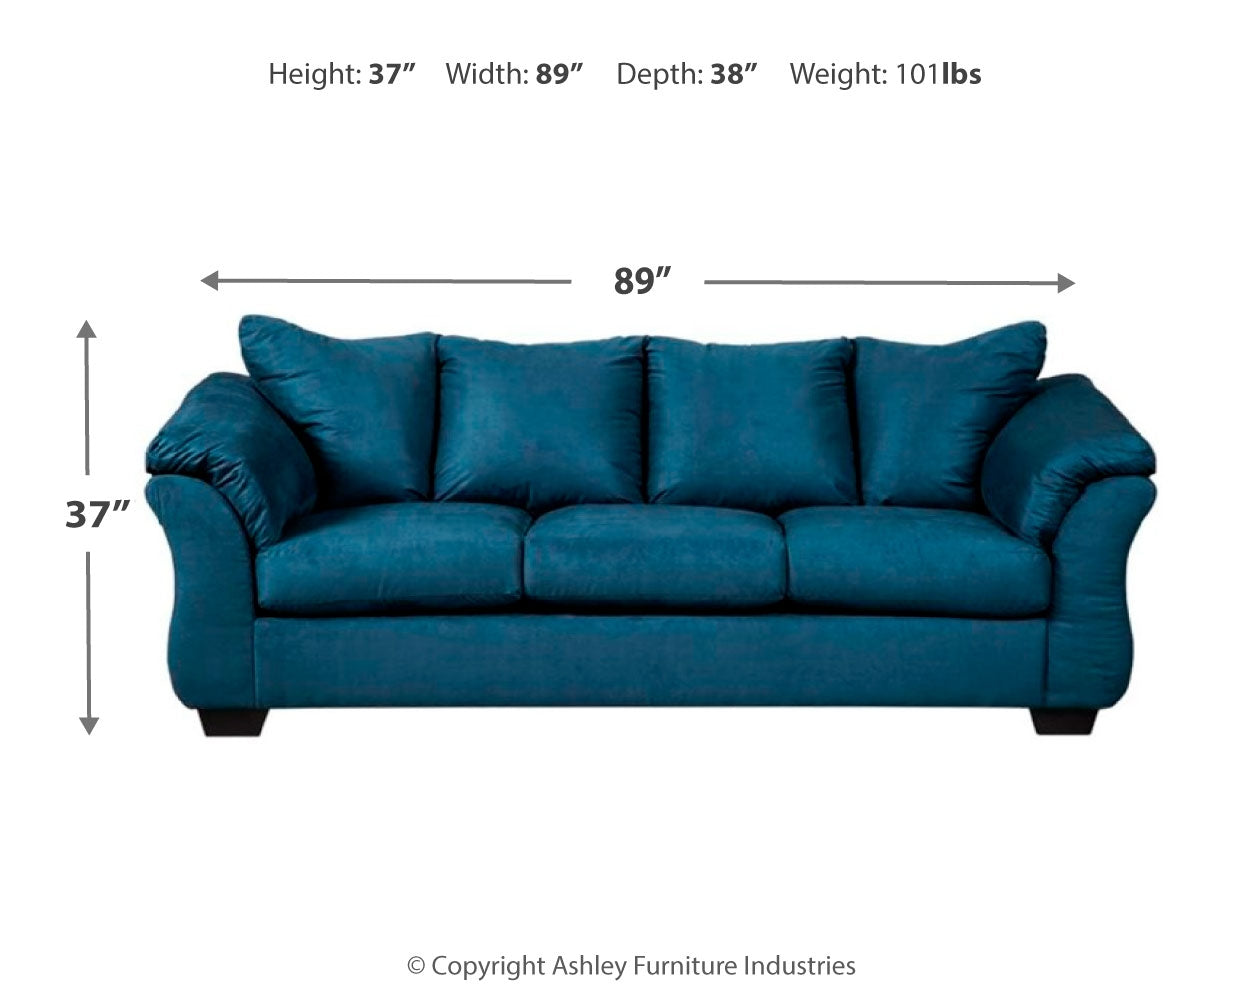 Darcy Blue Sofa, Loveseat, Chair and Ottoman